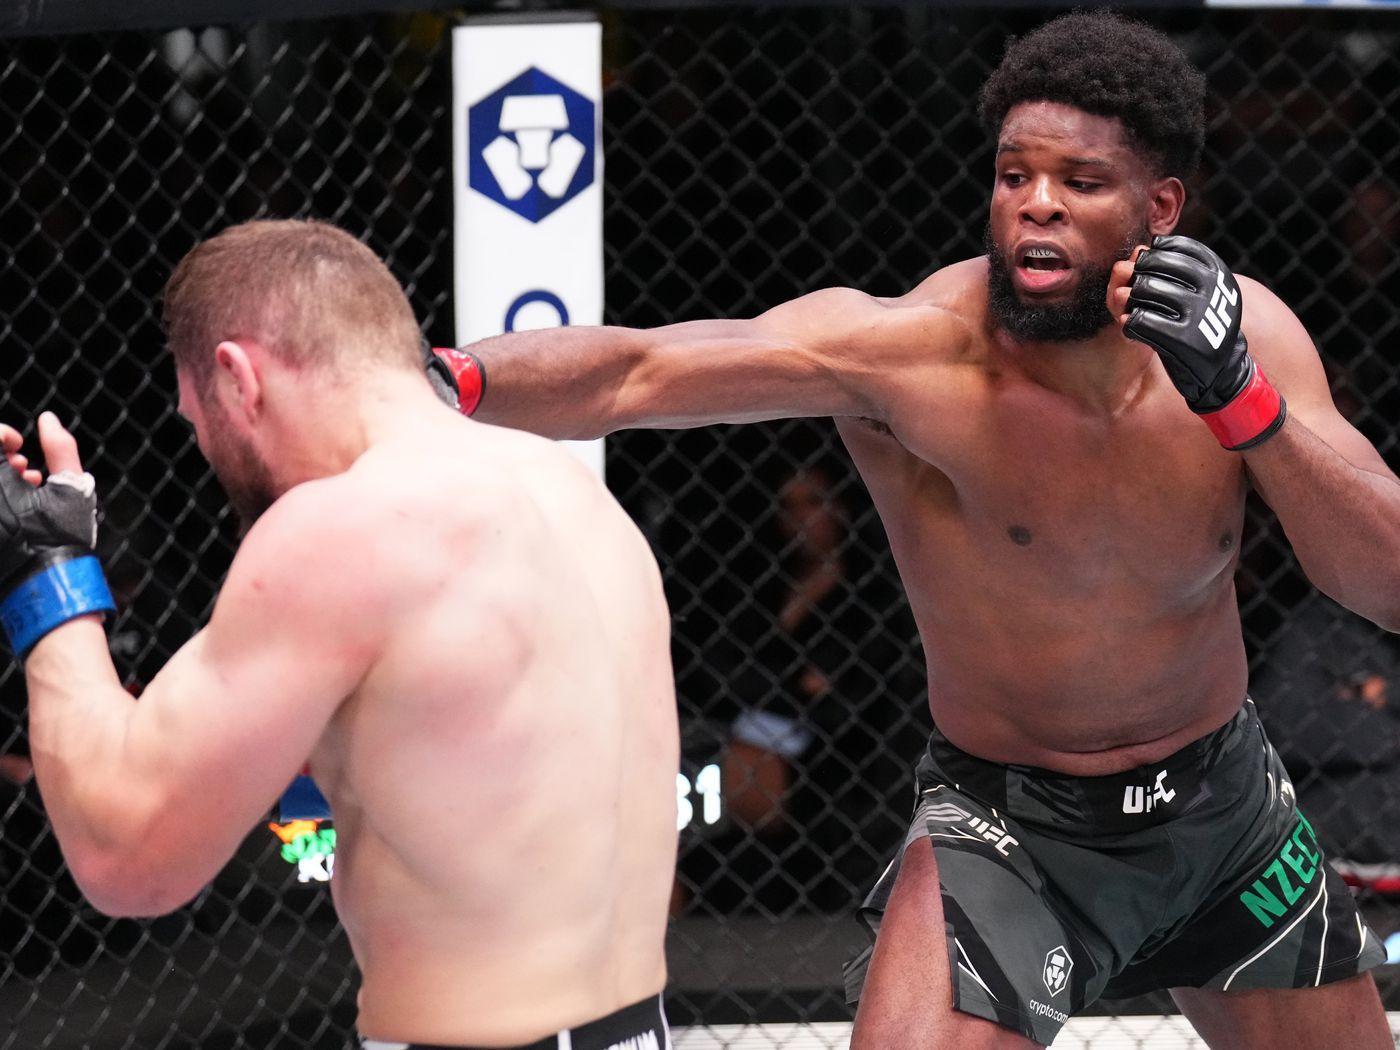 Nzechukwu in his recent win against Ion Cutelaba. Photo from MMA Fighting.